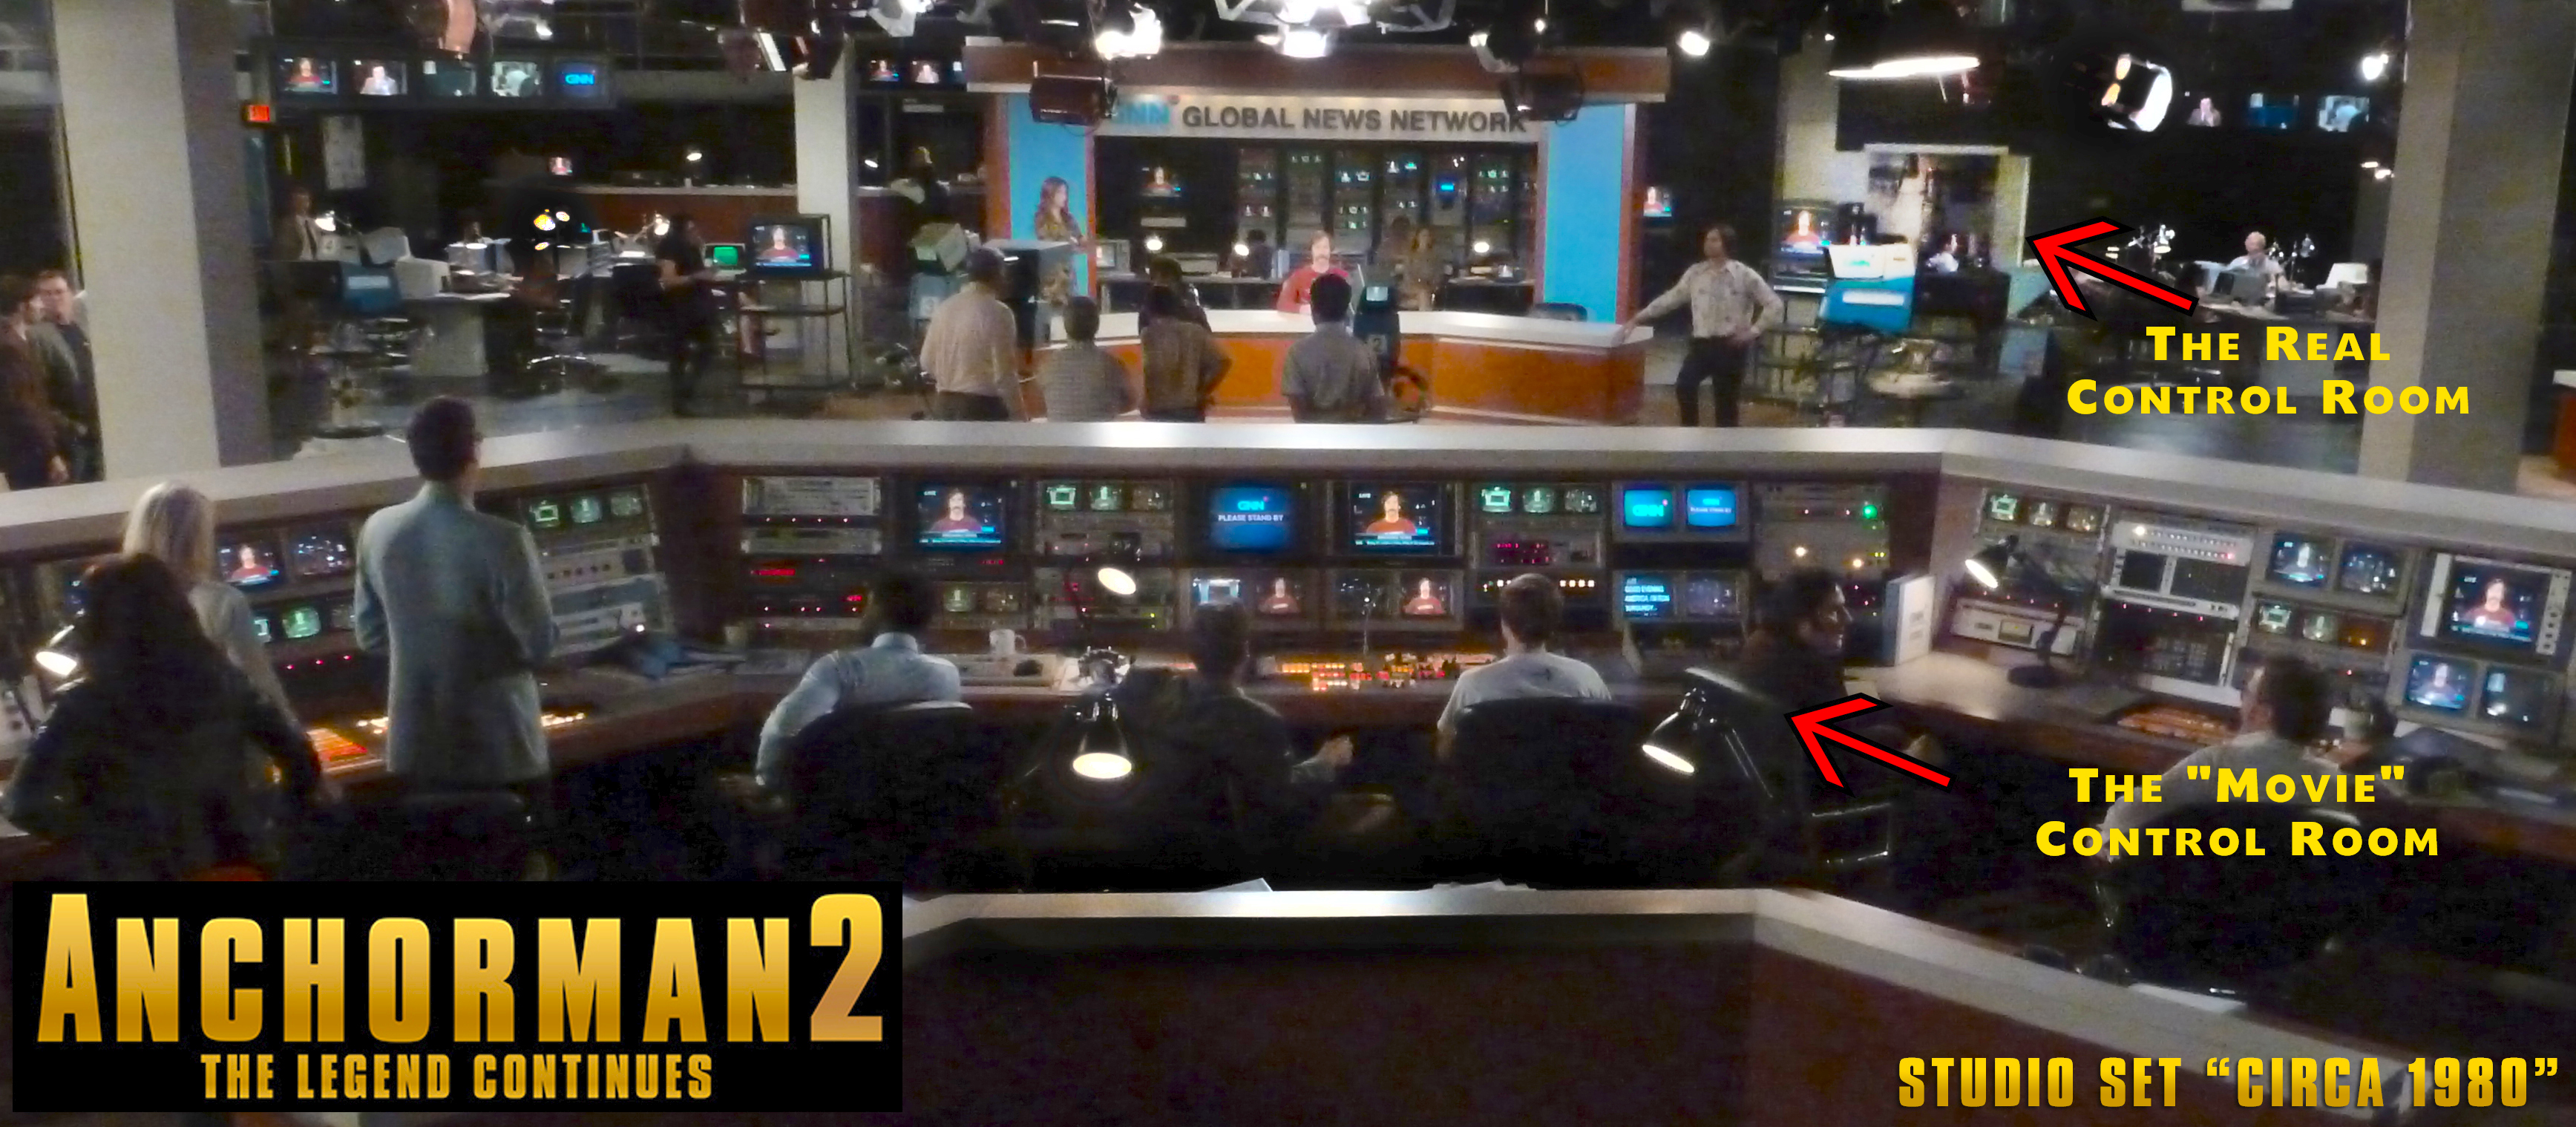 ANCHORMAN 2 - GNN News Studio. A custom built TV studio. The fully functional studio is seen throughout much of the film.